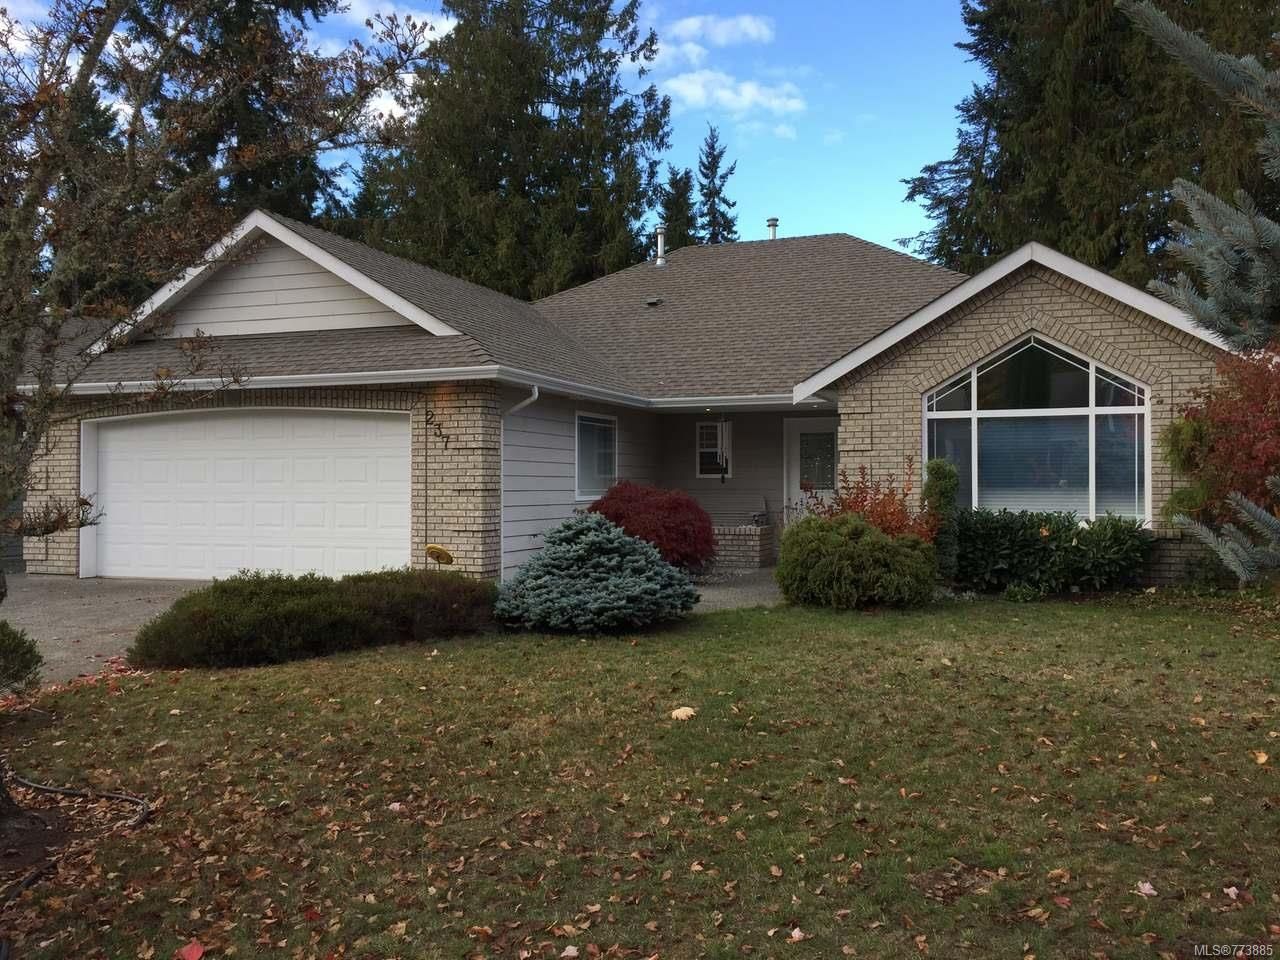 I have sold a property at 237 Hamilton Ave in Parksville
